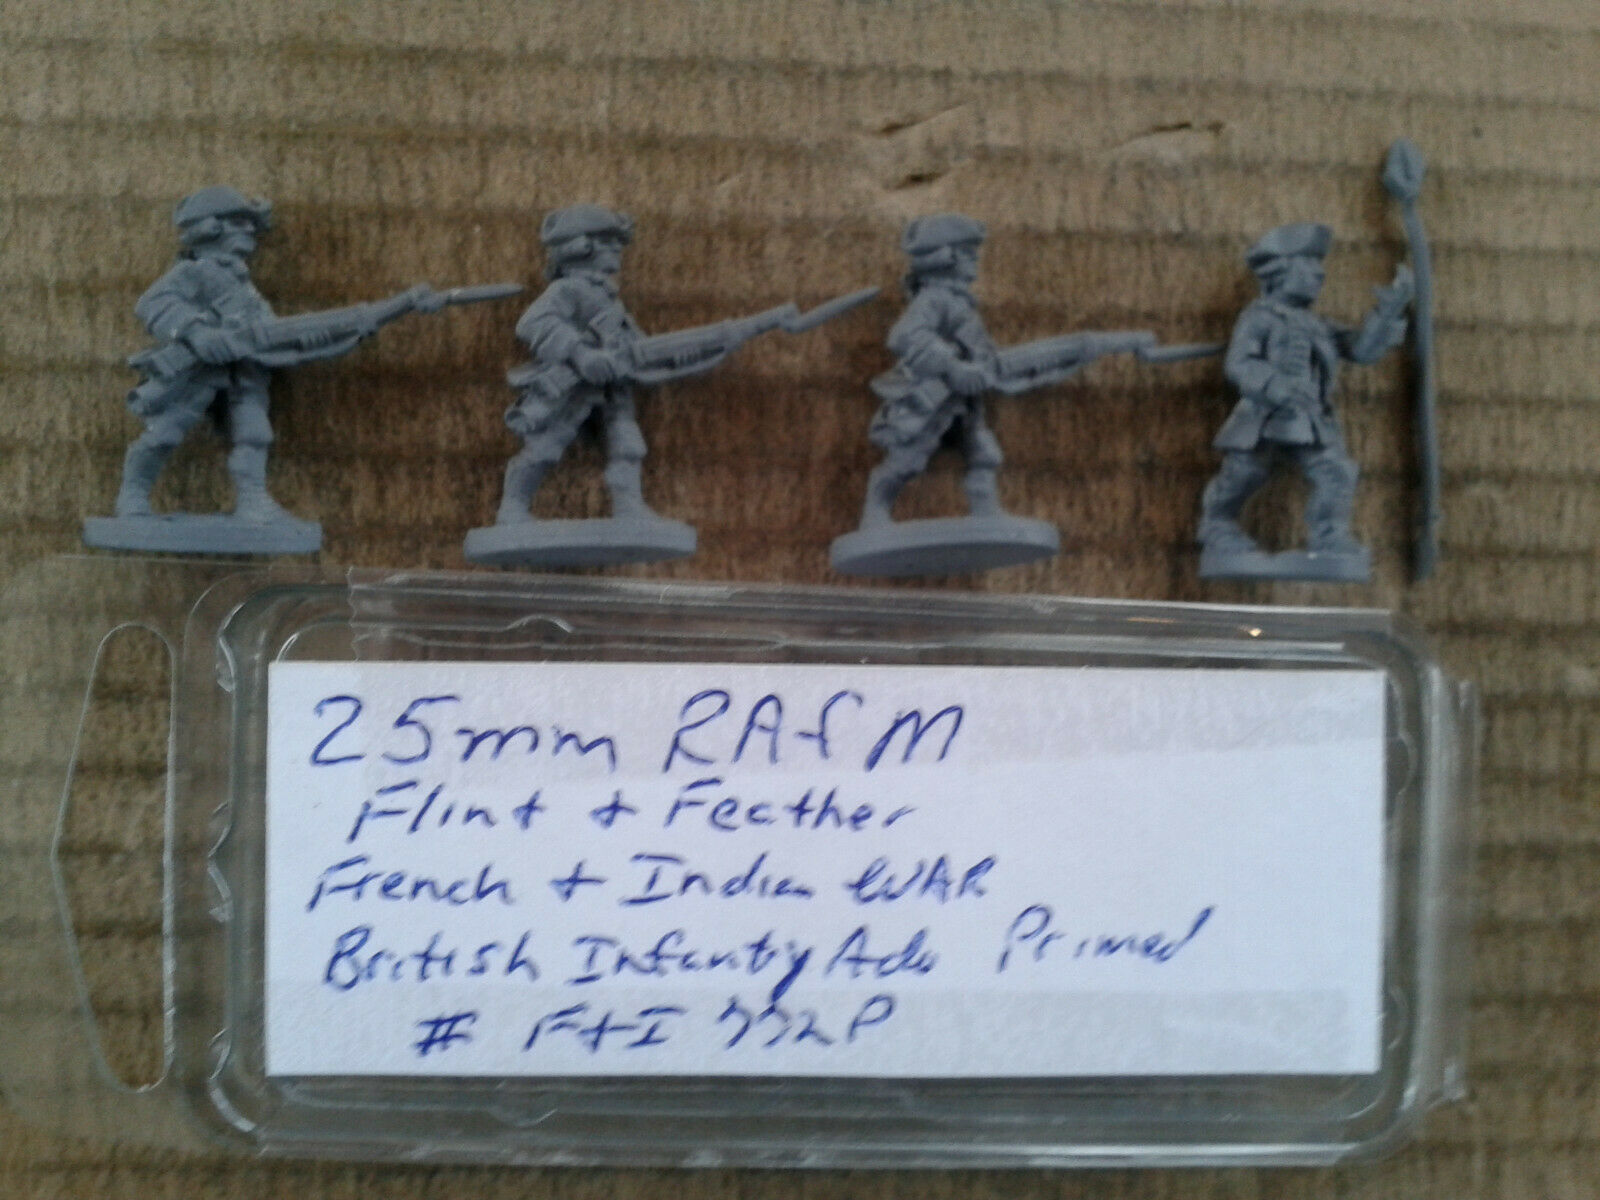 25mm RAFM Flint & Feather French & Indian war British Infantry adv Primed